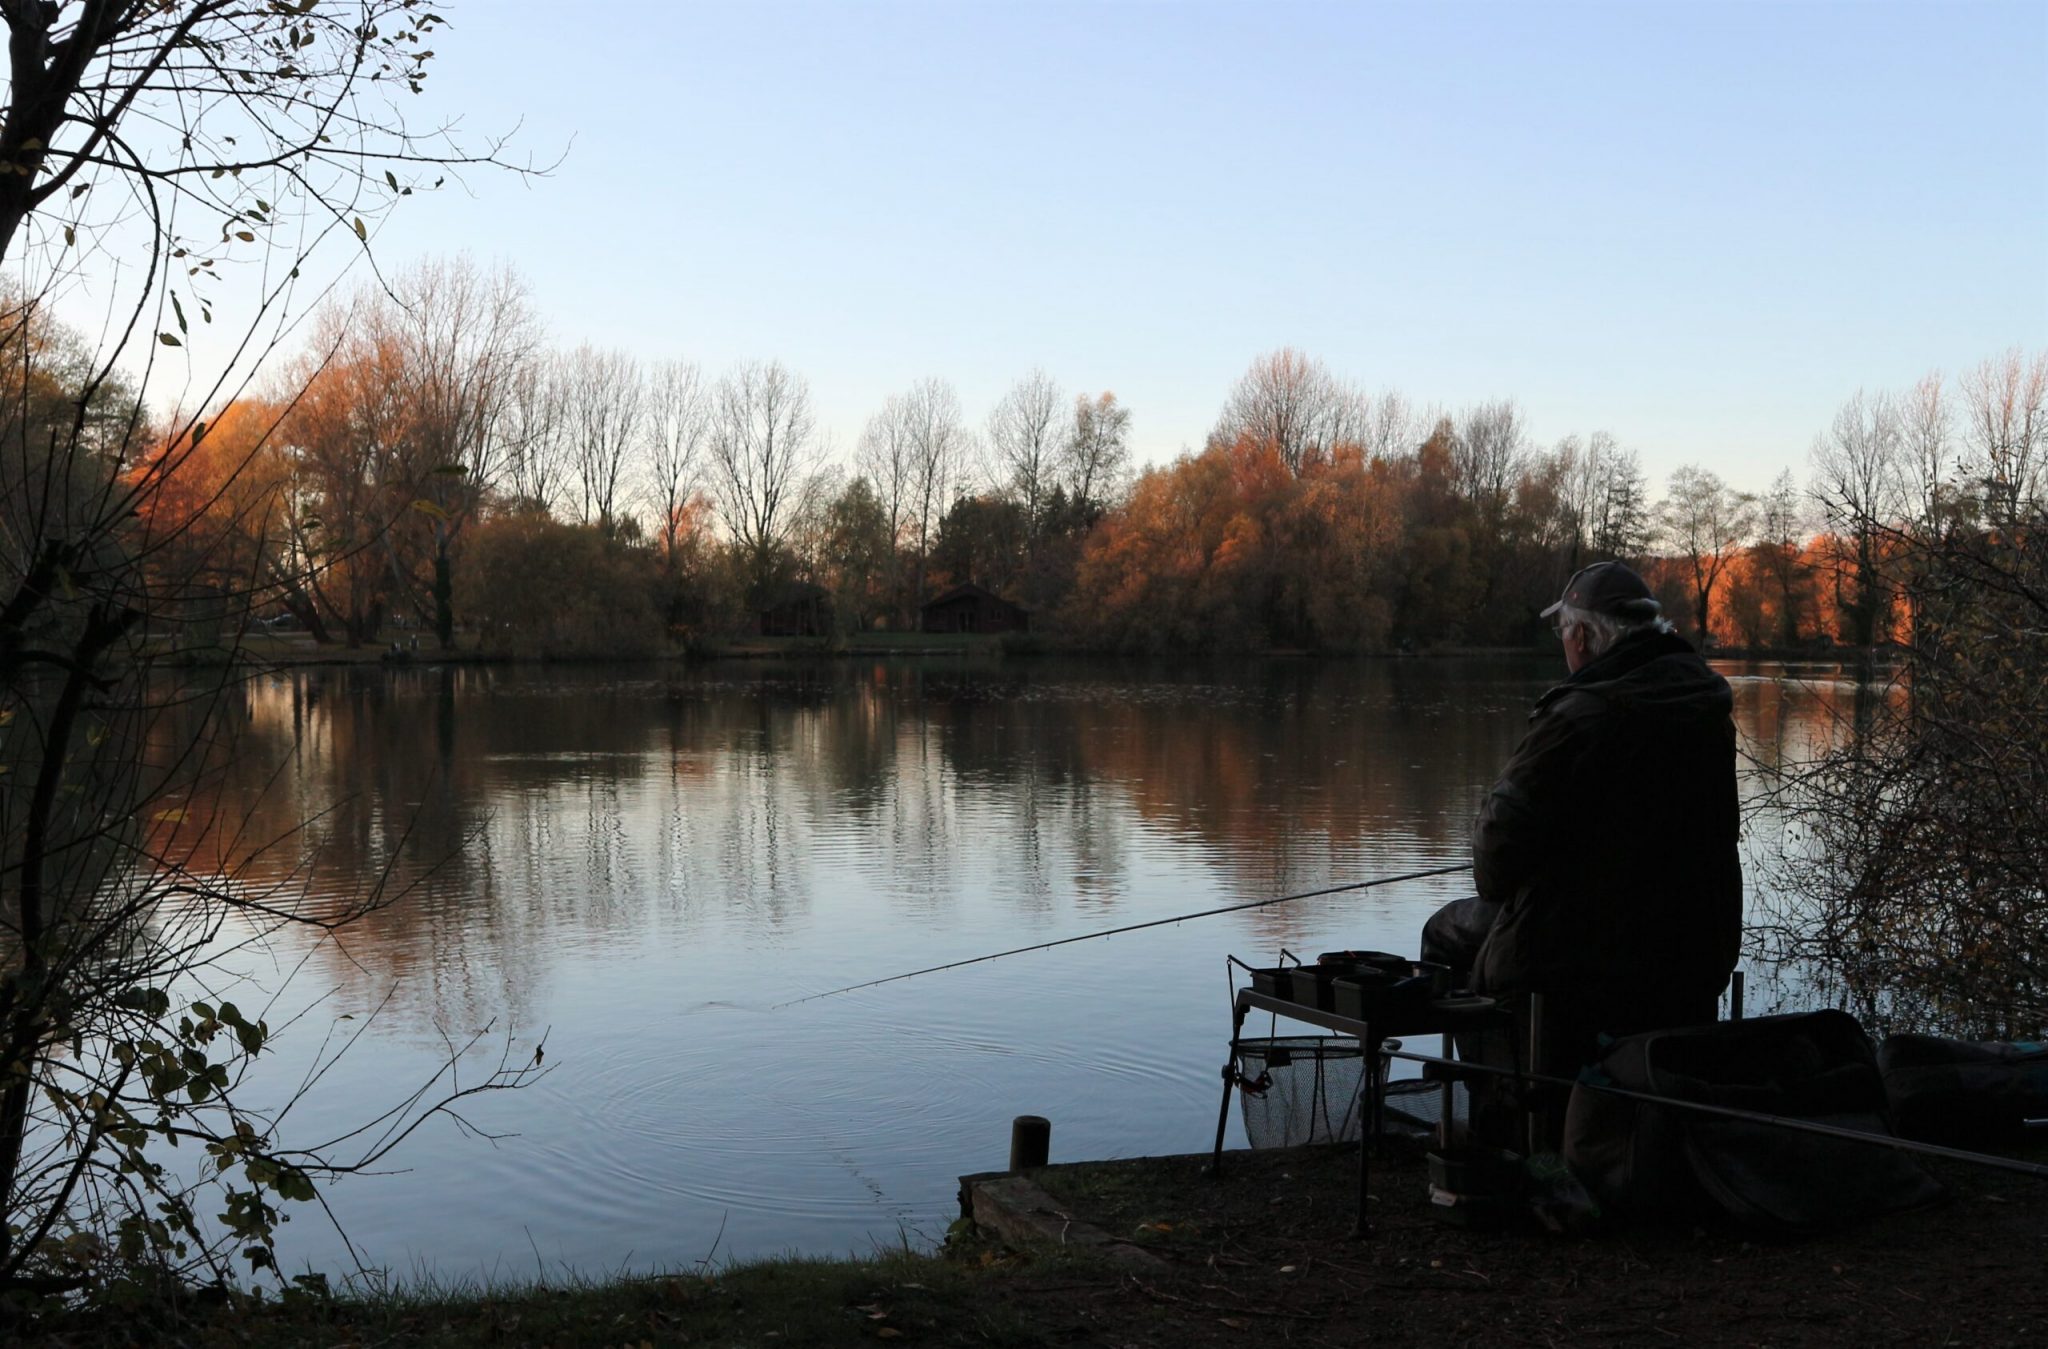 Dave Coster's Top 12 Super Rig Tips - Coarse Fishing - Edge Tackle